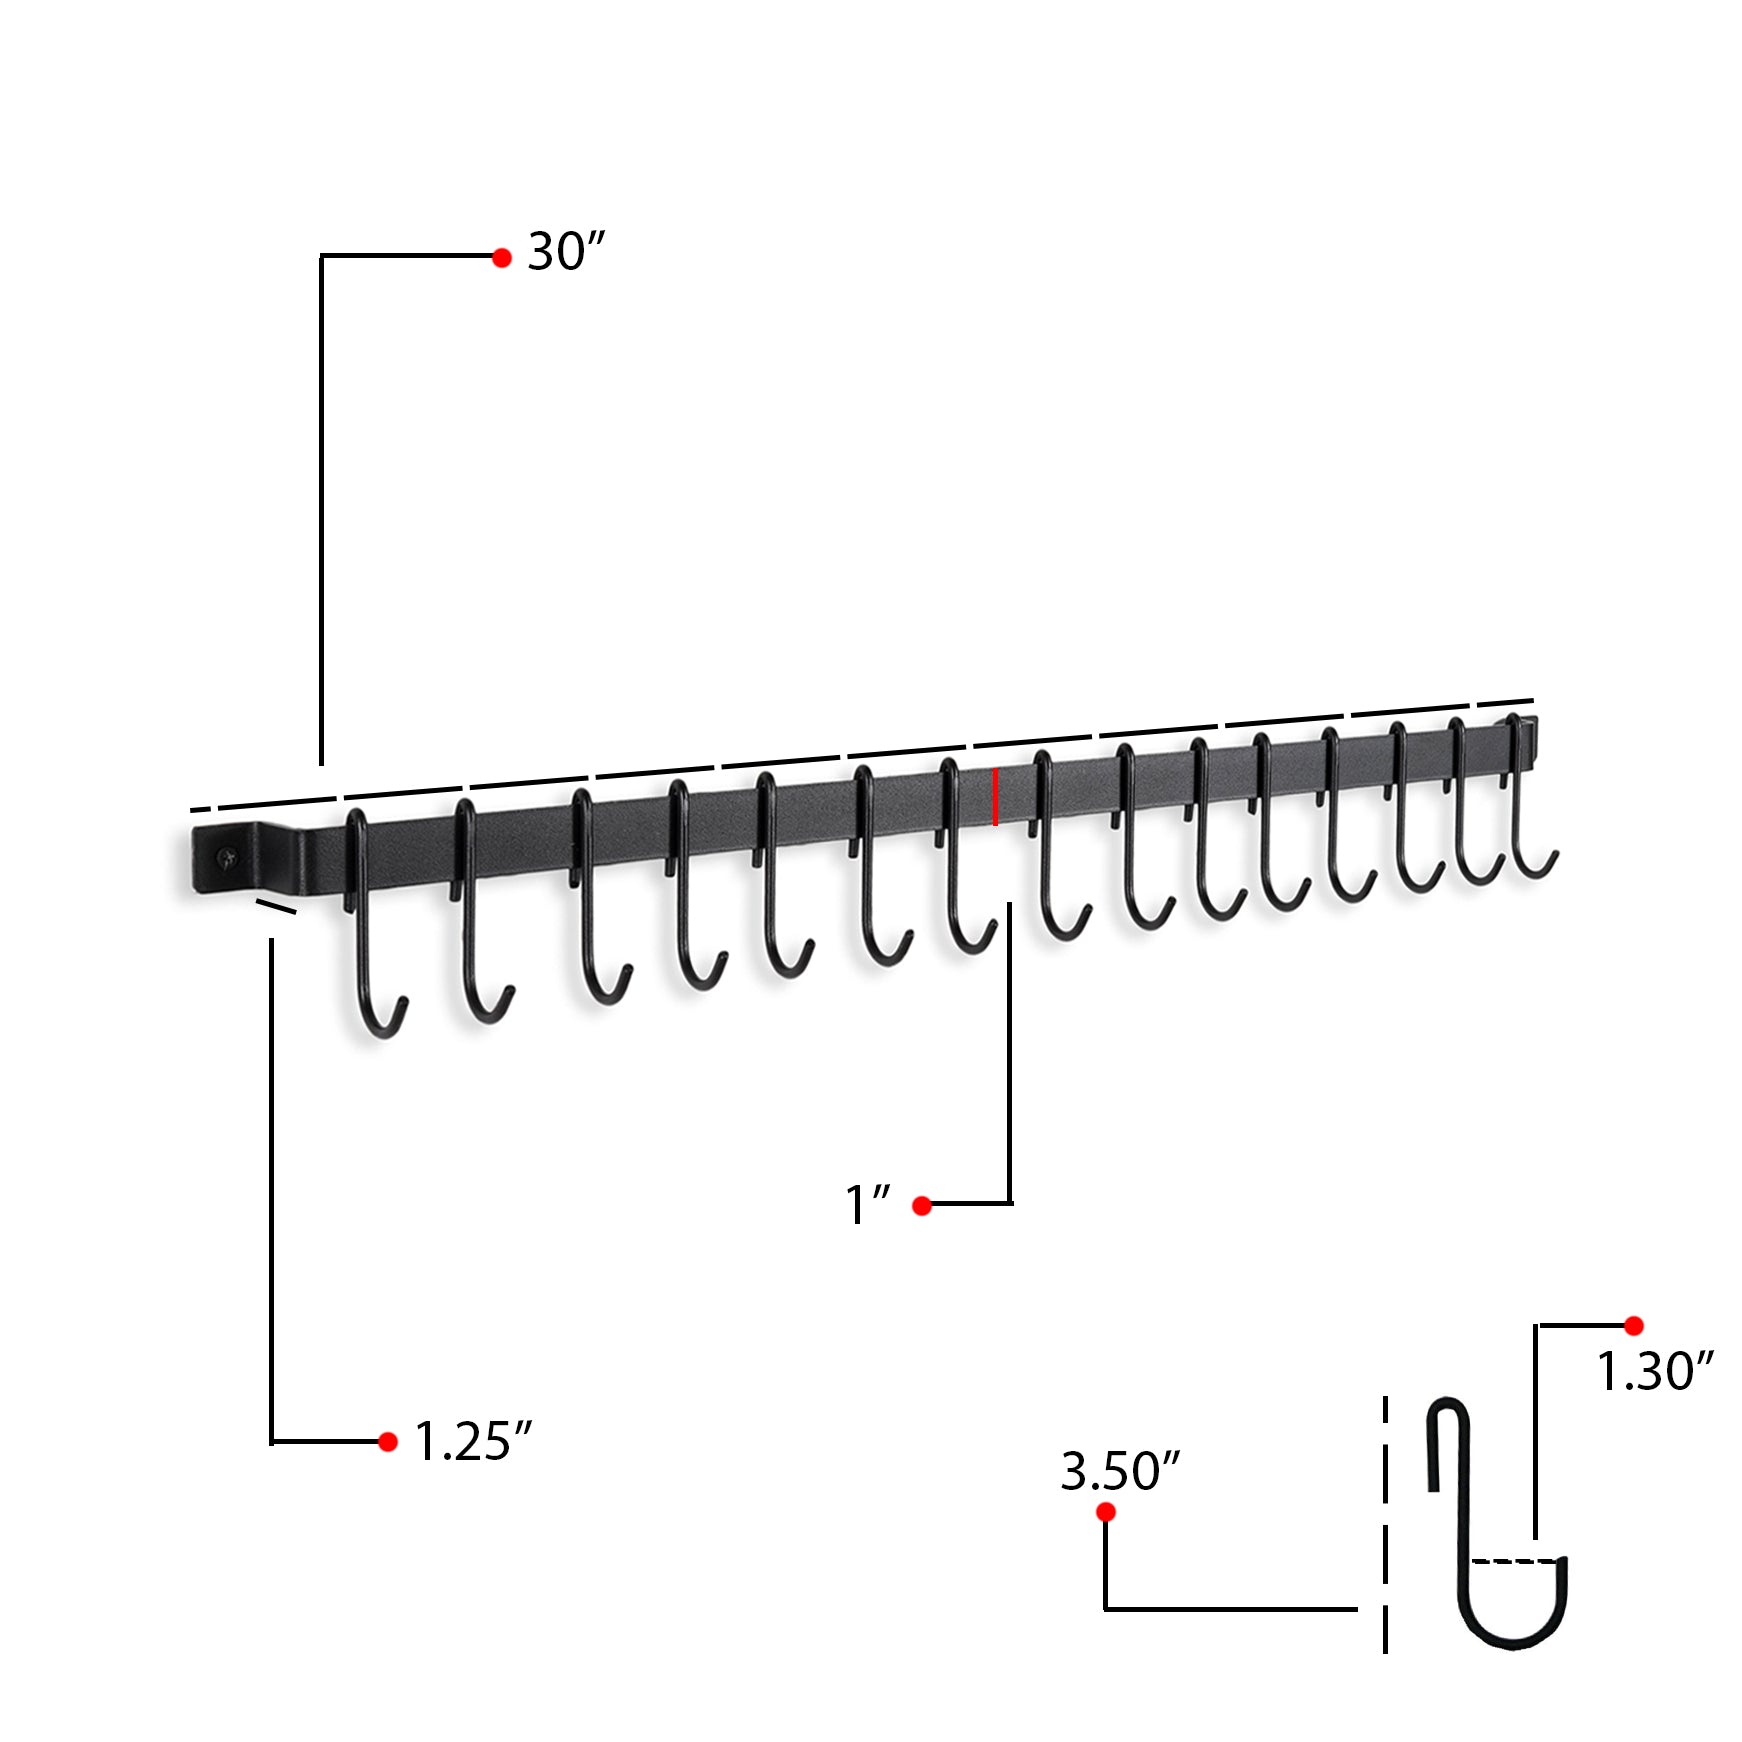 CASTO Wall Mount Kitchen Utensil Holder with S Hooks for Hanging - 17" with 10 Hooks - 30" with 15 Hooks - Black - Wallniture